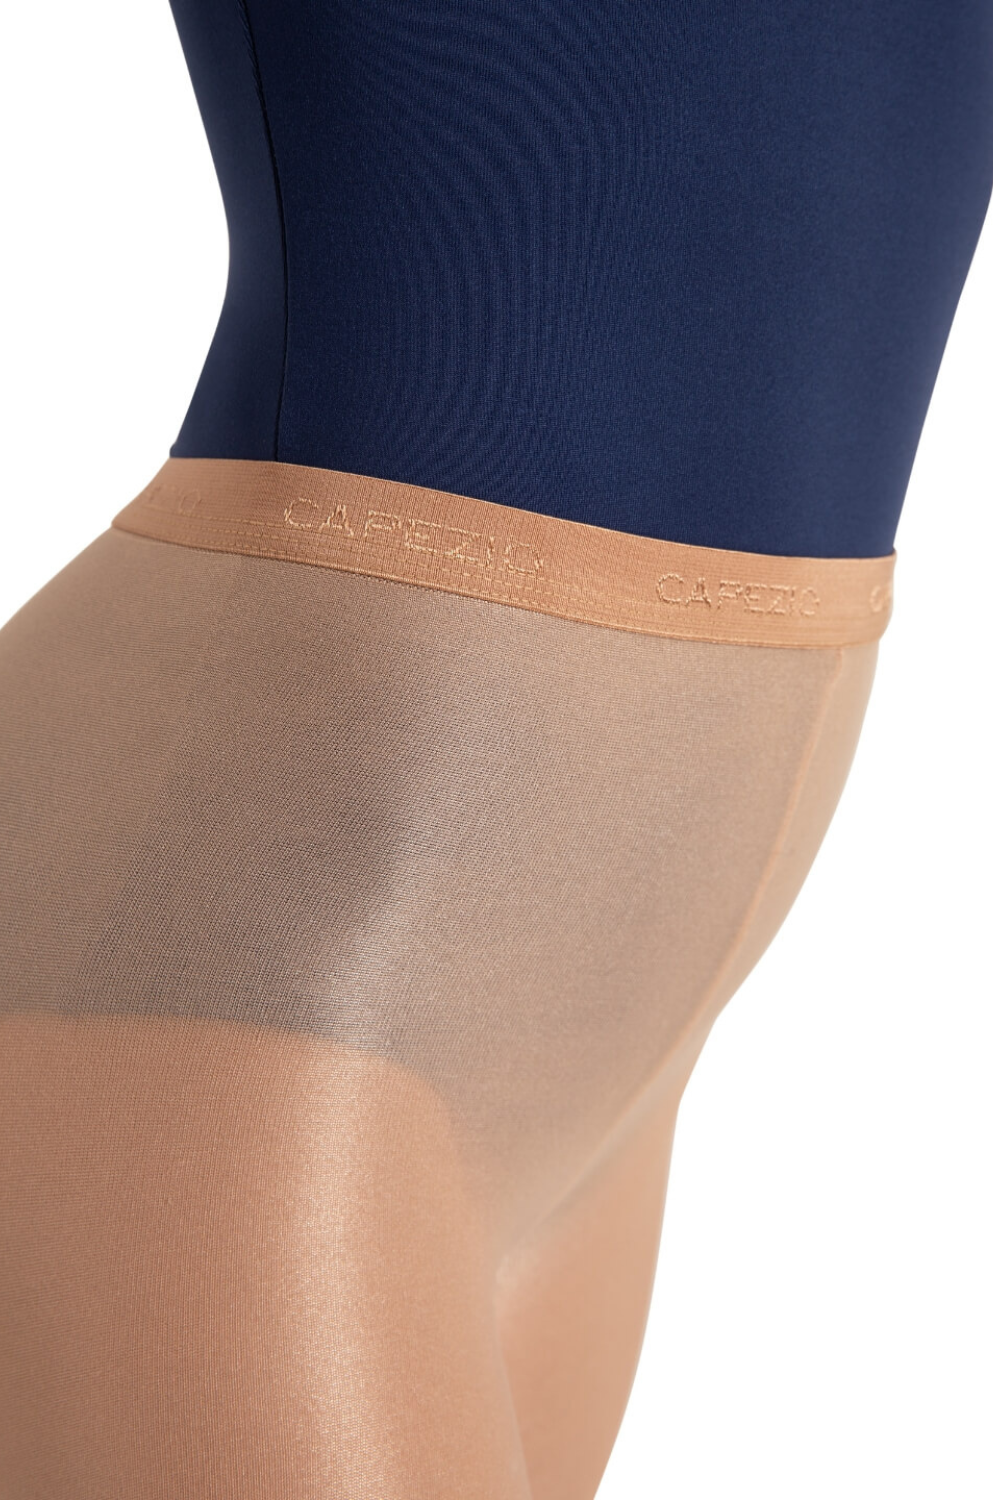 CAPEZIO 1809W ULTRA SHIMMERY FOOTED TIGHT